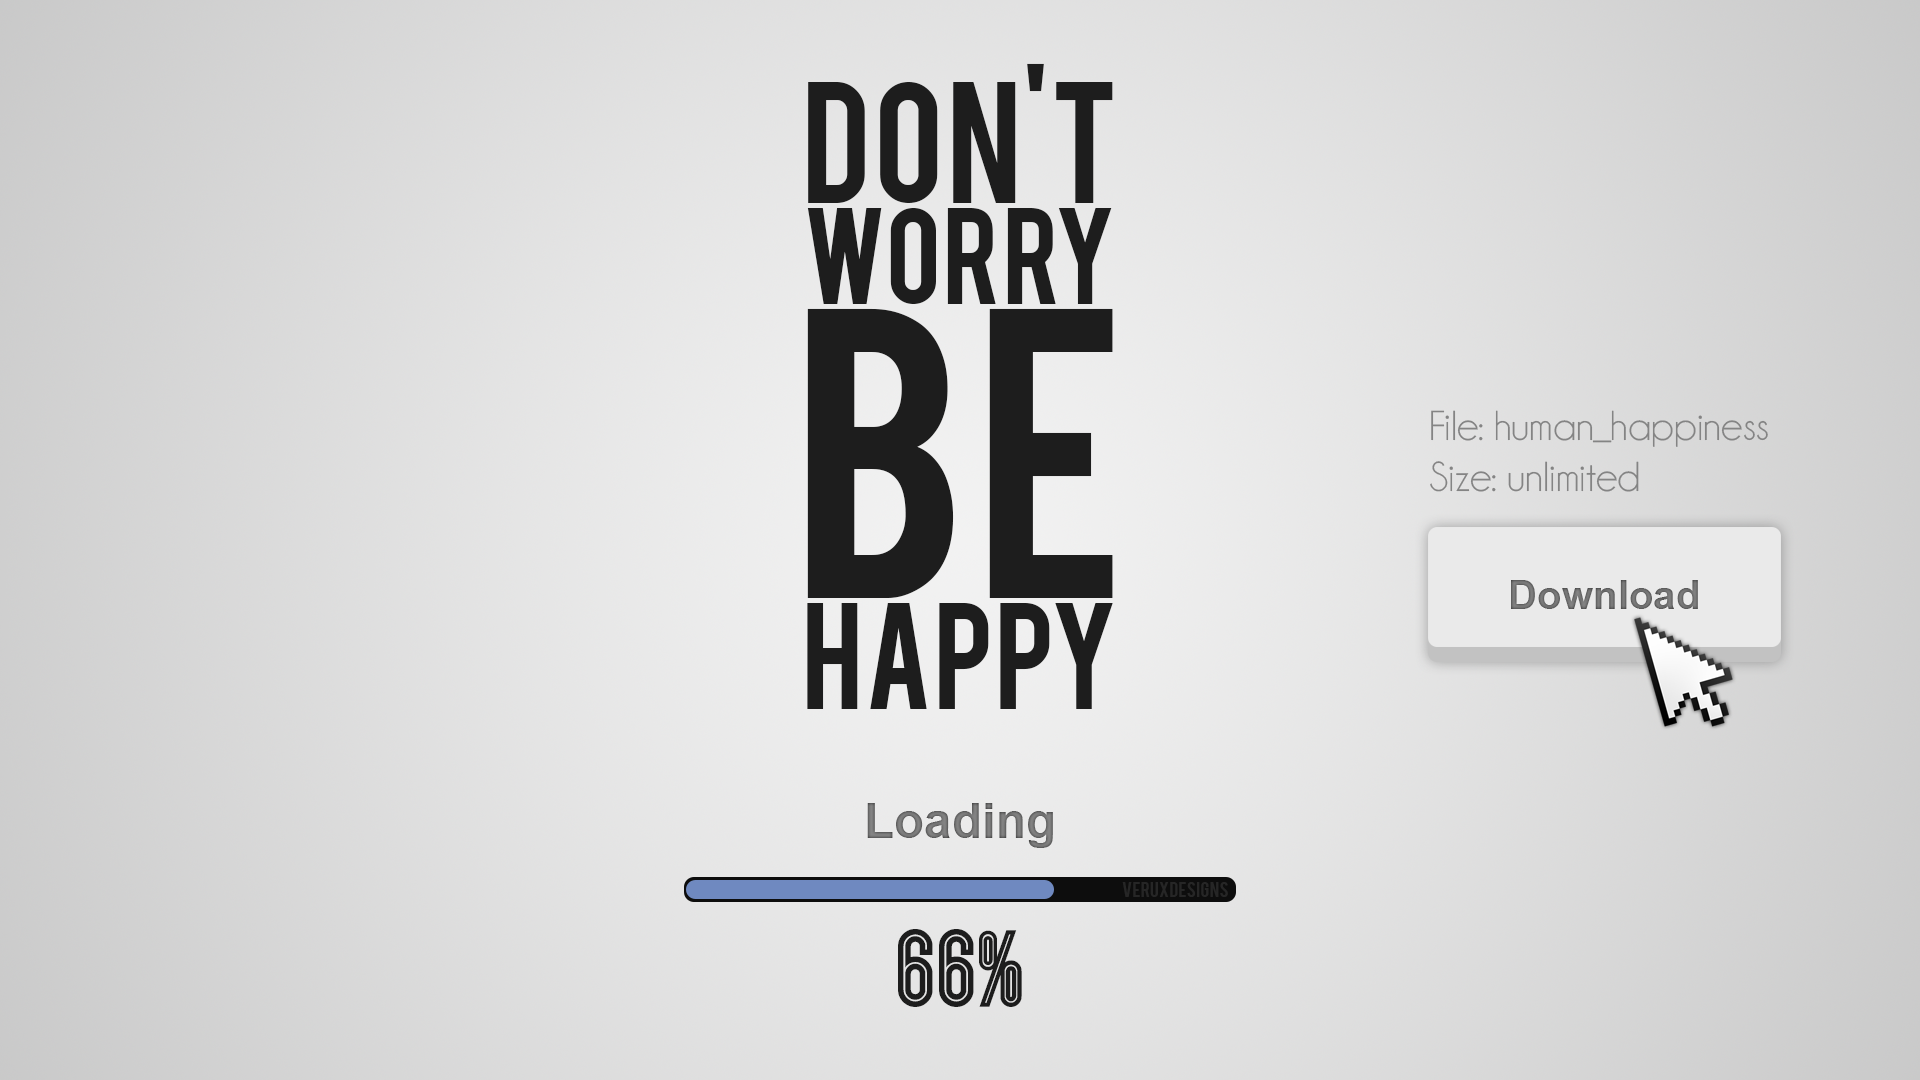 Dont worry by Happy обои. Don't worry be Happy обои. Don`t worry be Happy заставка. Don't worry be Happy картинки. Don t worry dont